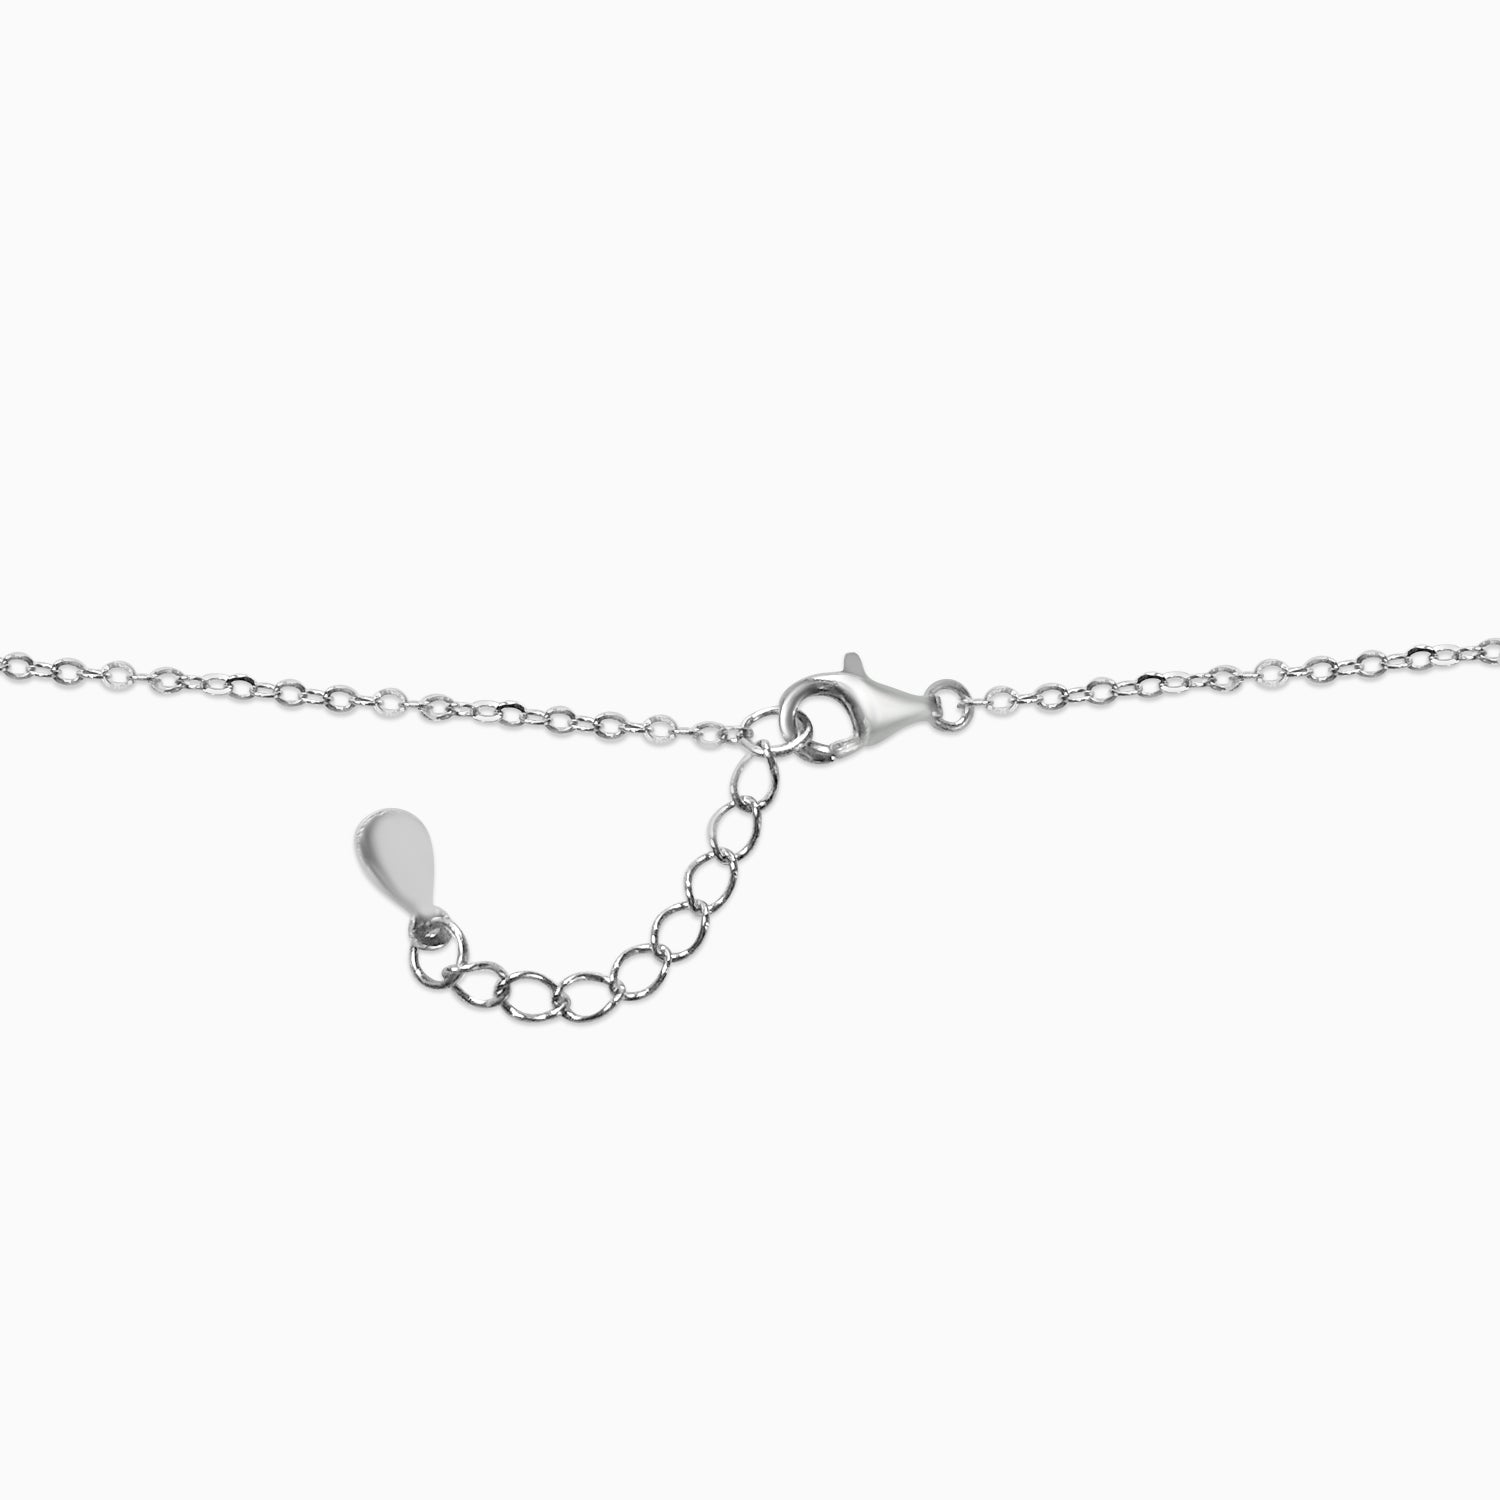 Silver Sparkling Intertwined Love Hearts Necklace